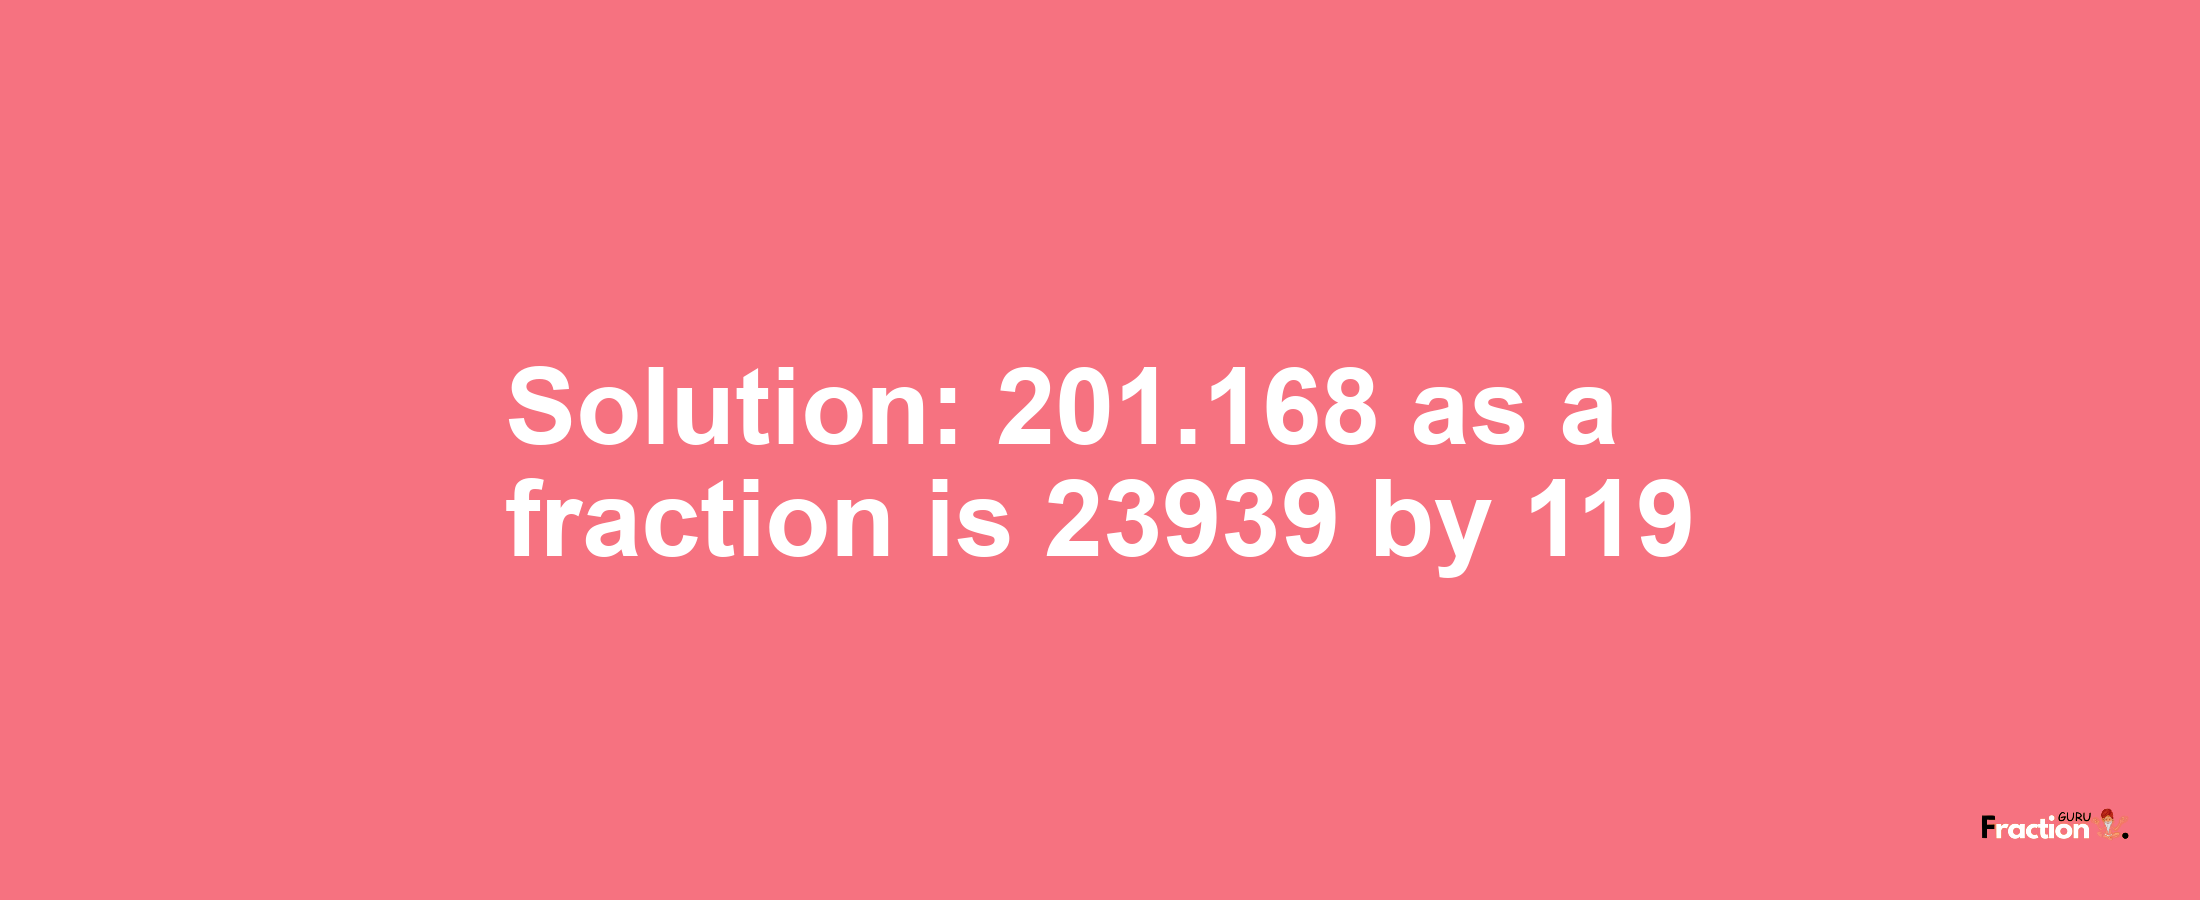 Solution:201.168 as a fraction is 23939/119